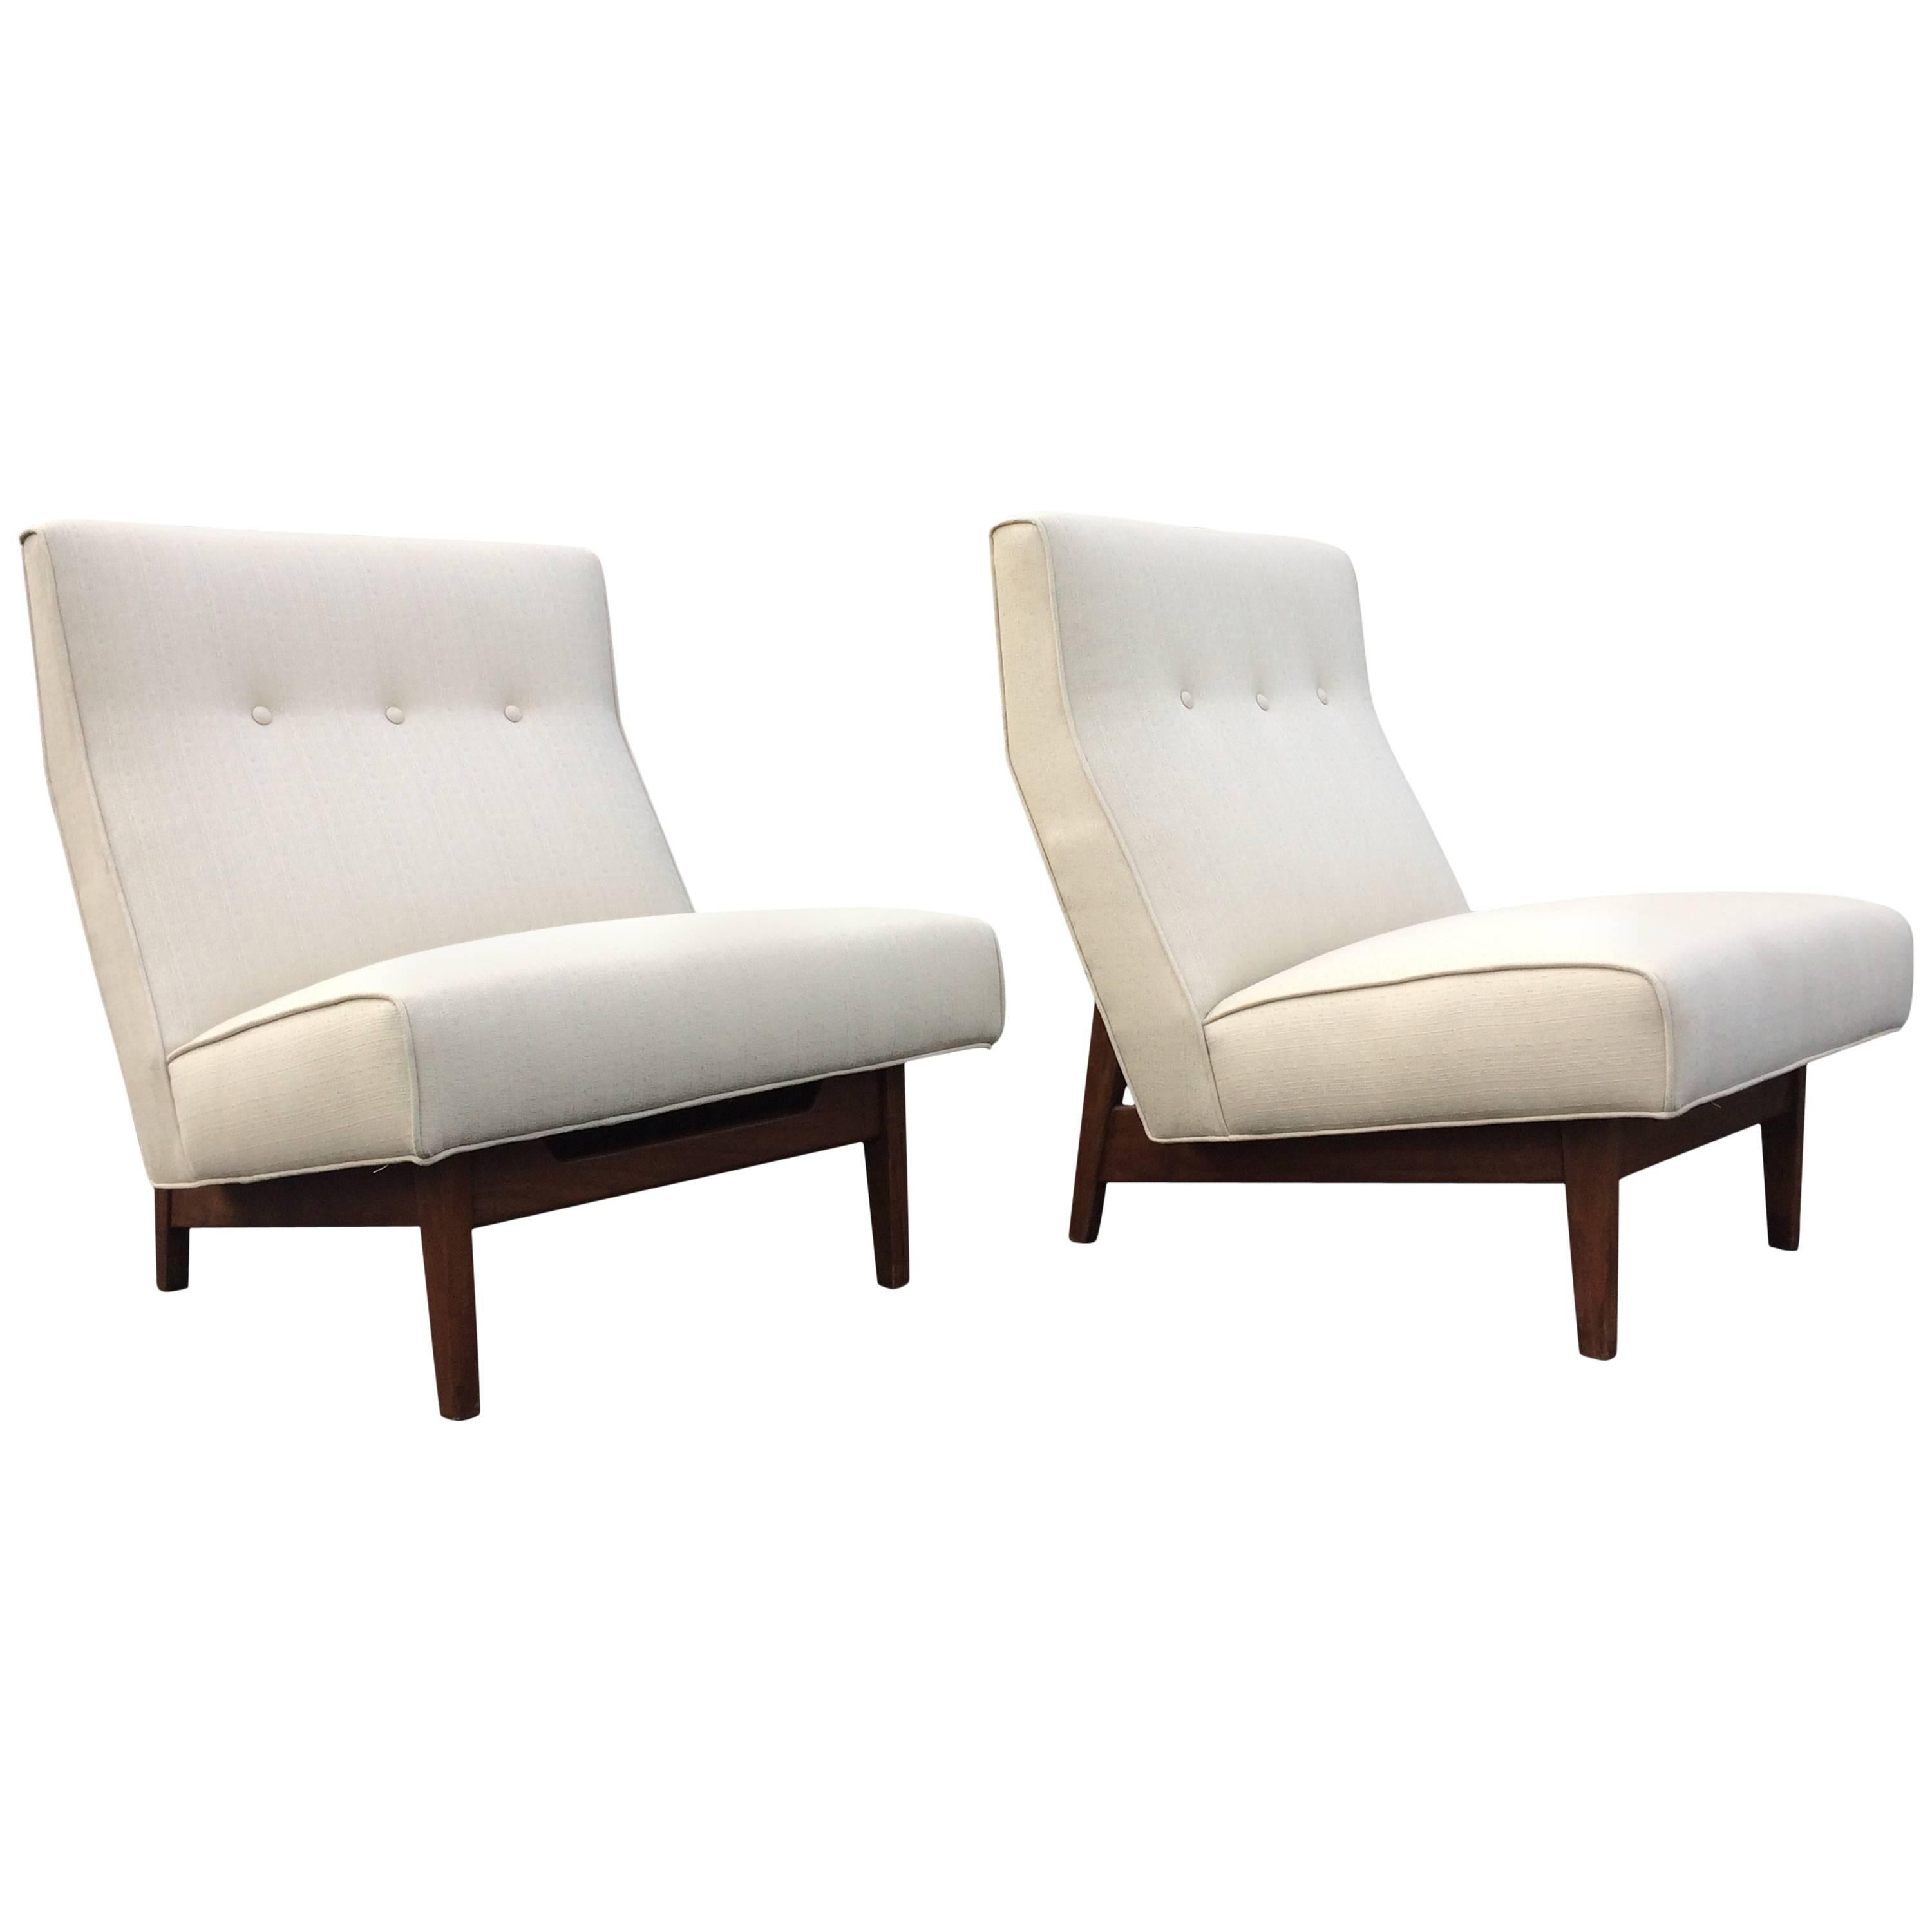 Two Great Jens Risom Lounge Chairs, USA, 1950s